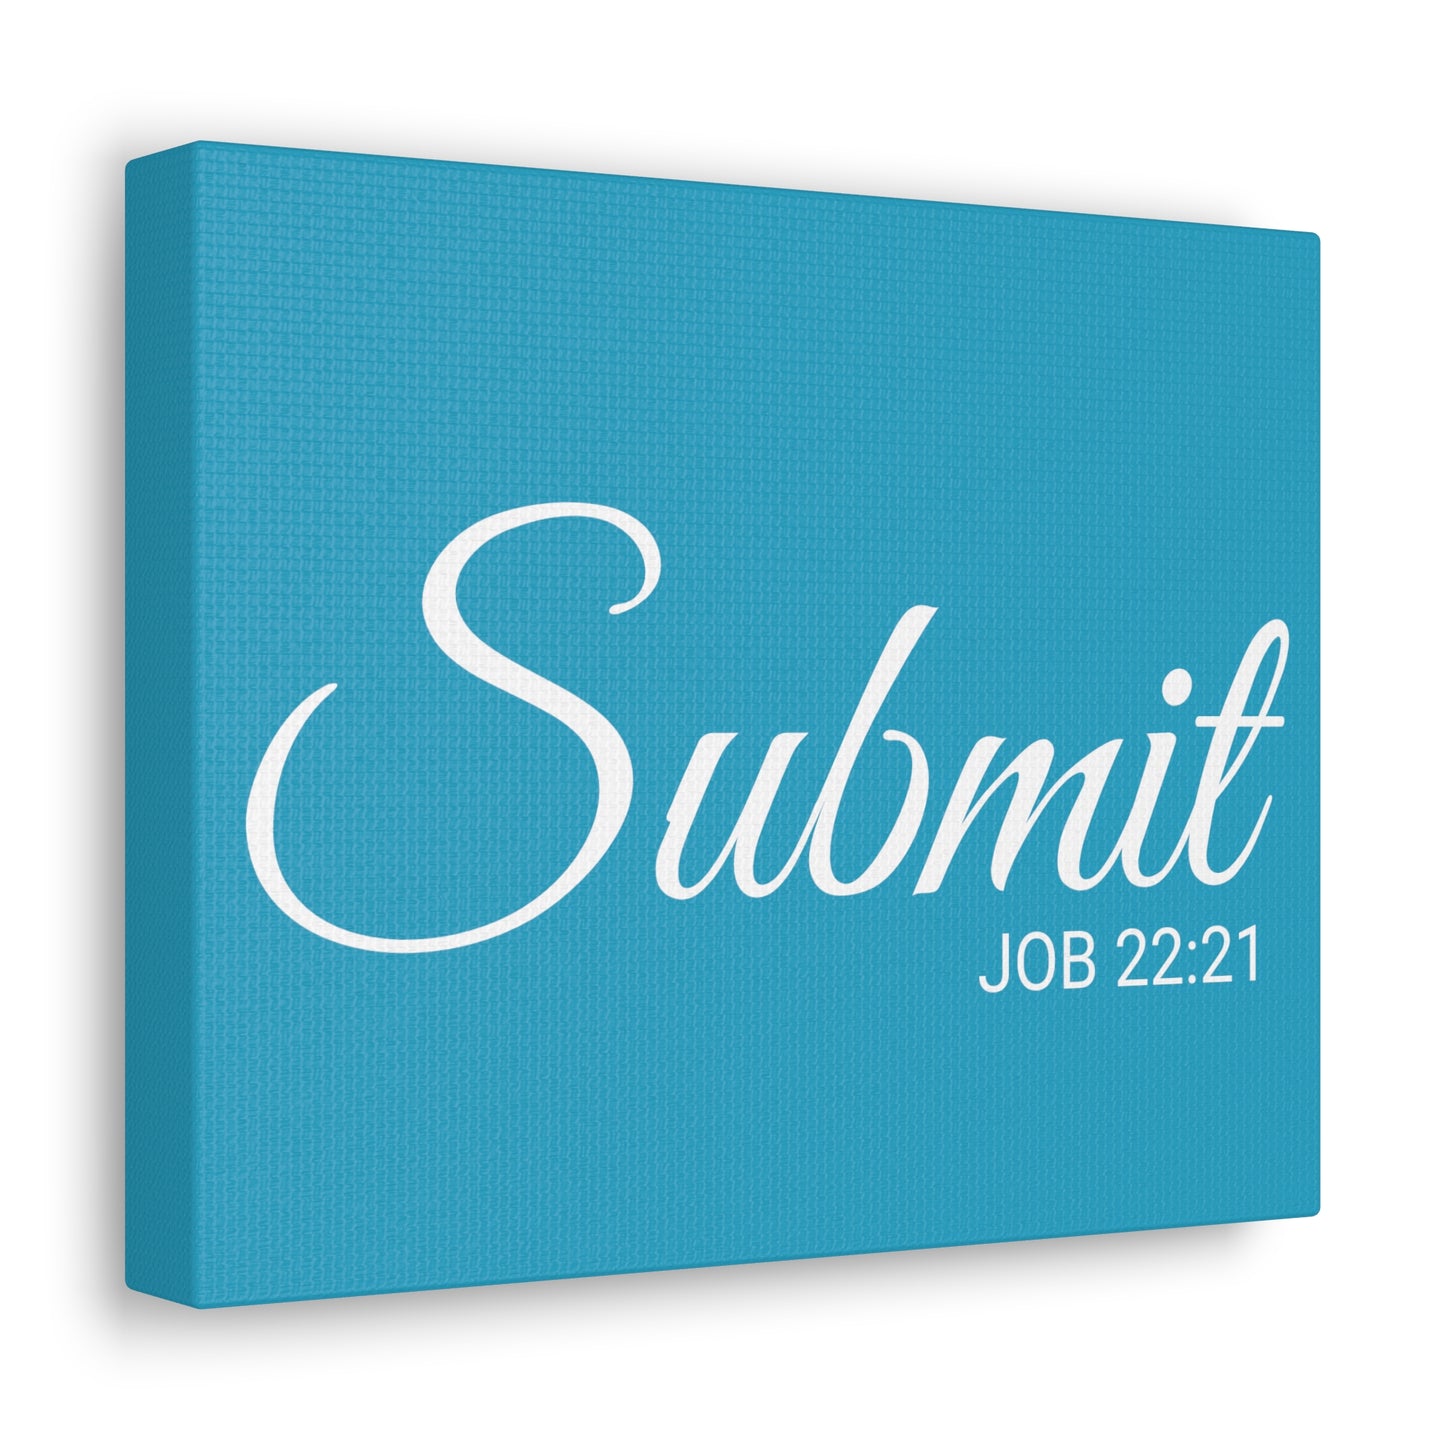 Christian Wall Art "Submit" Verse Job 22:21 Ready to Hang Unframed